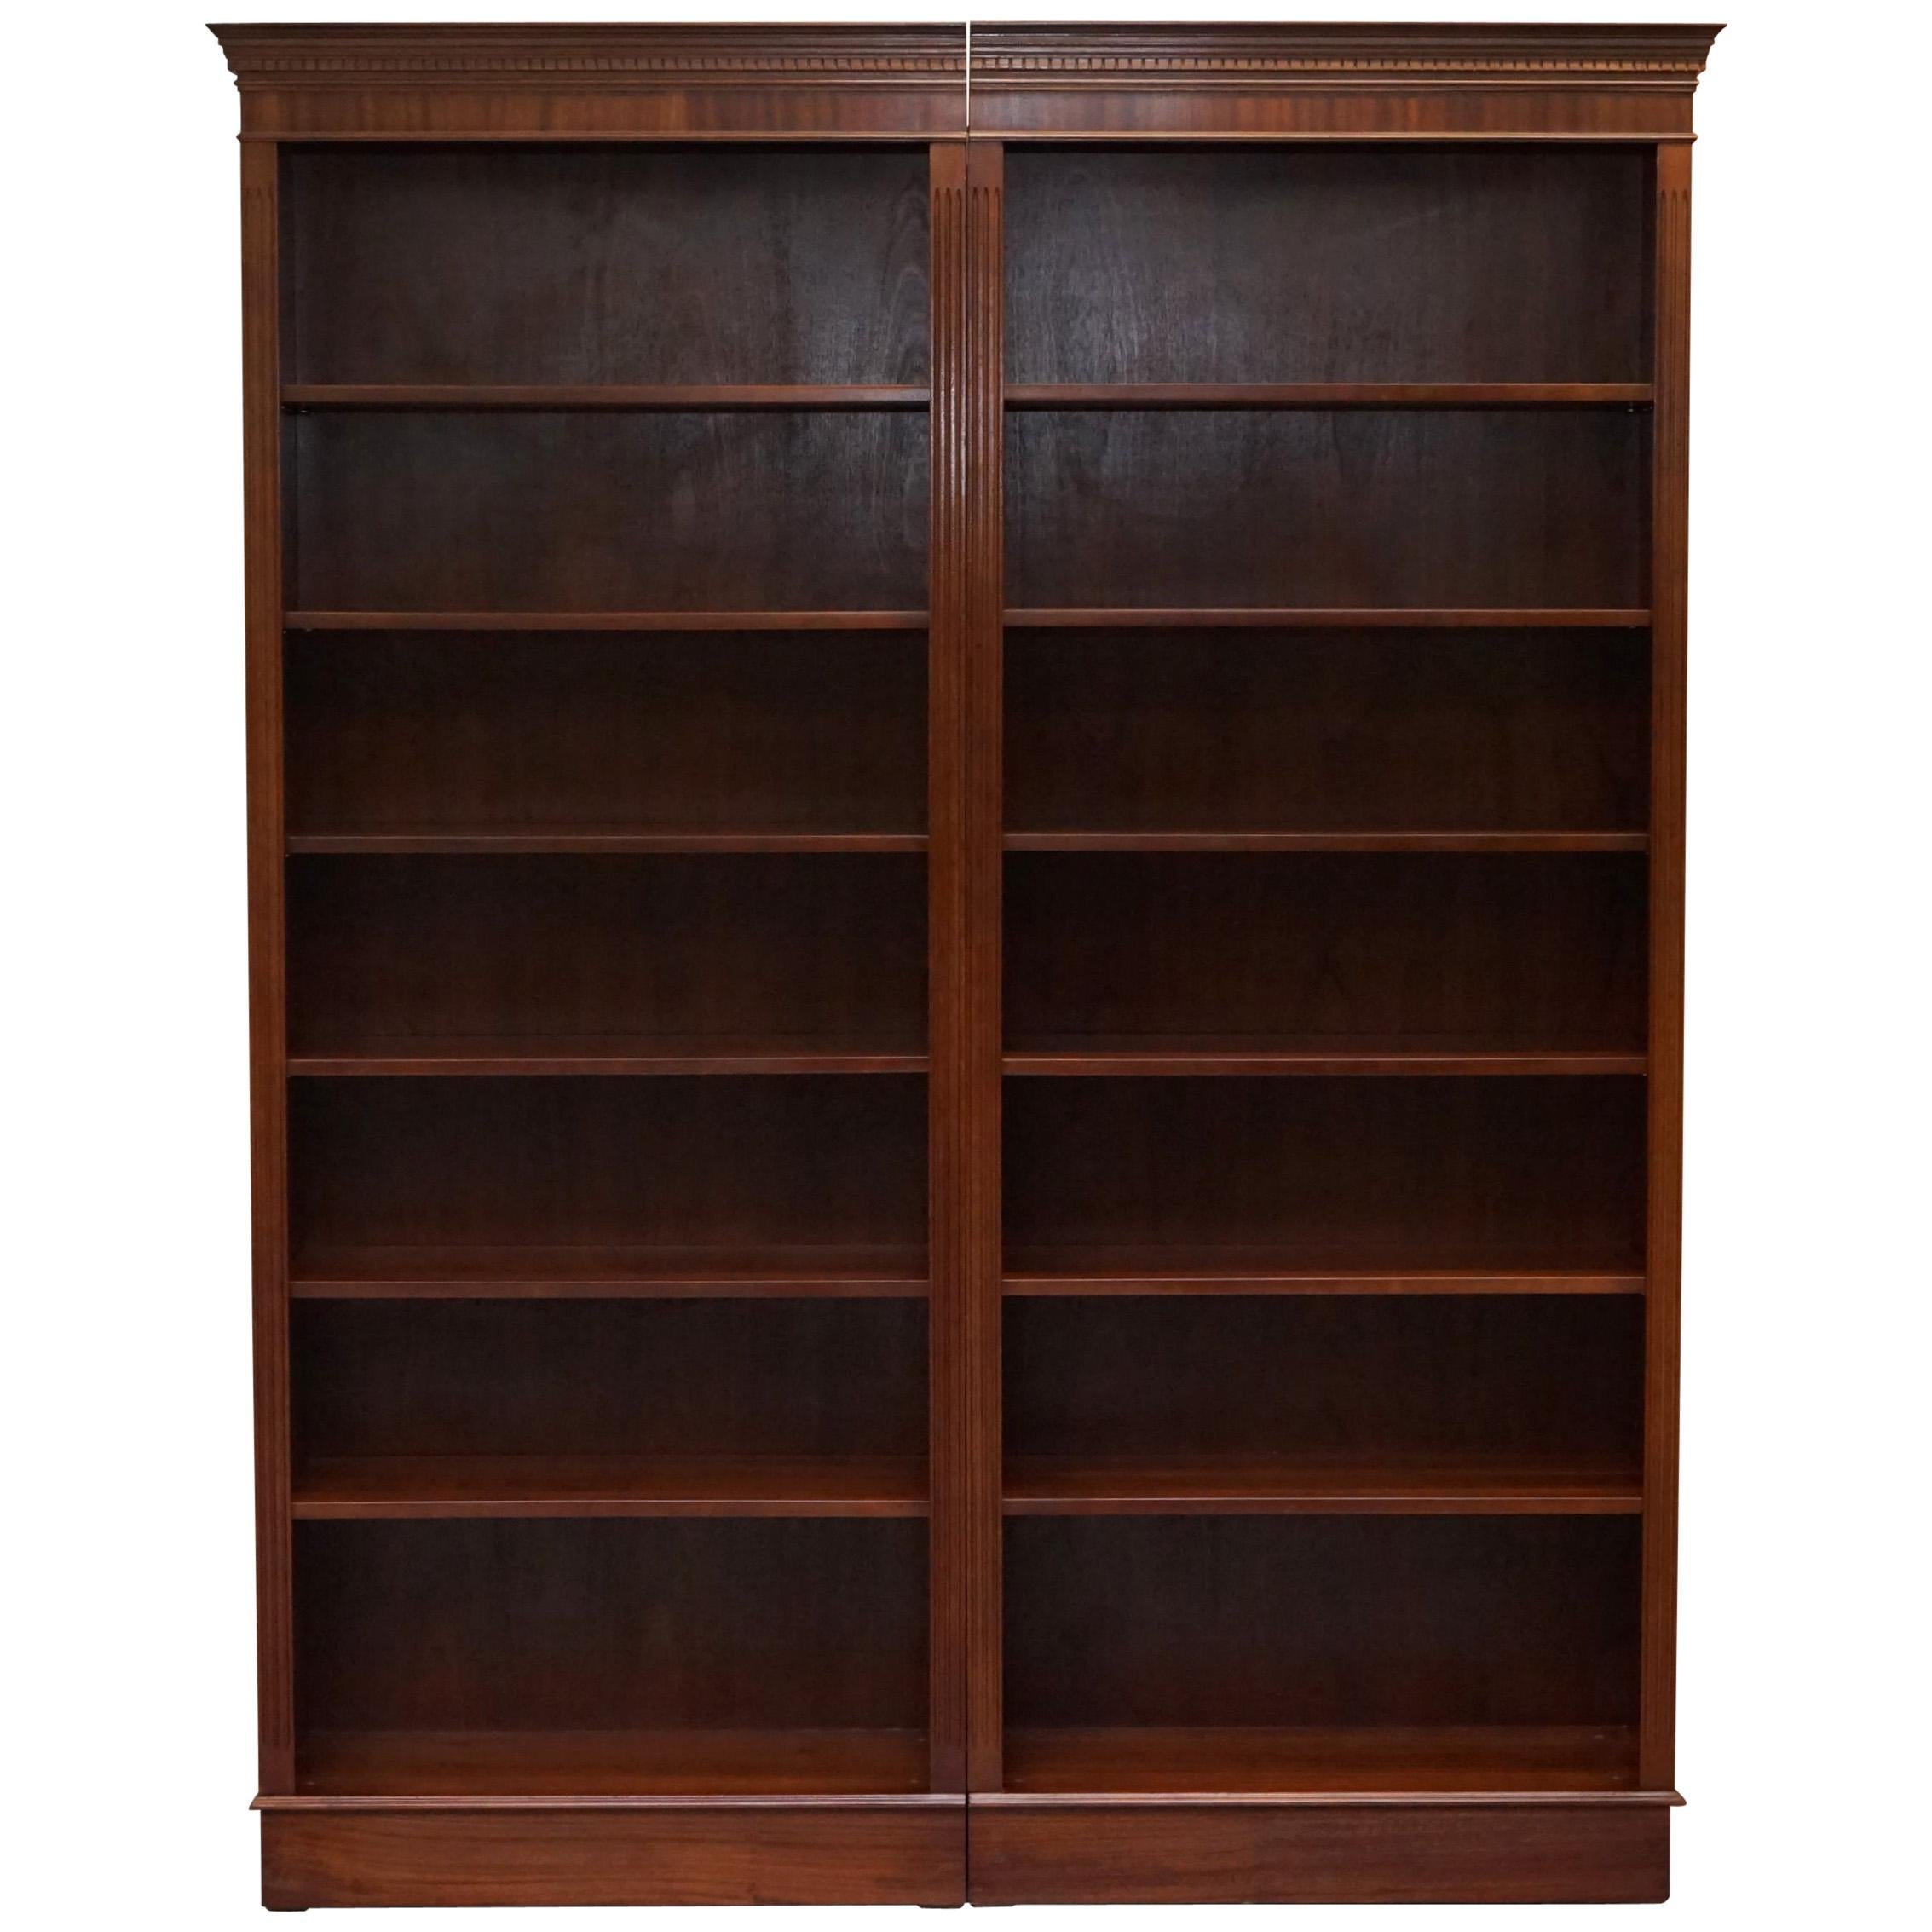 Stunning Flamed Mahogany Library Bookcase Splits into Two for Ease of Transport